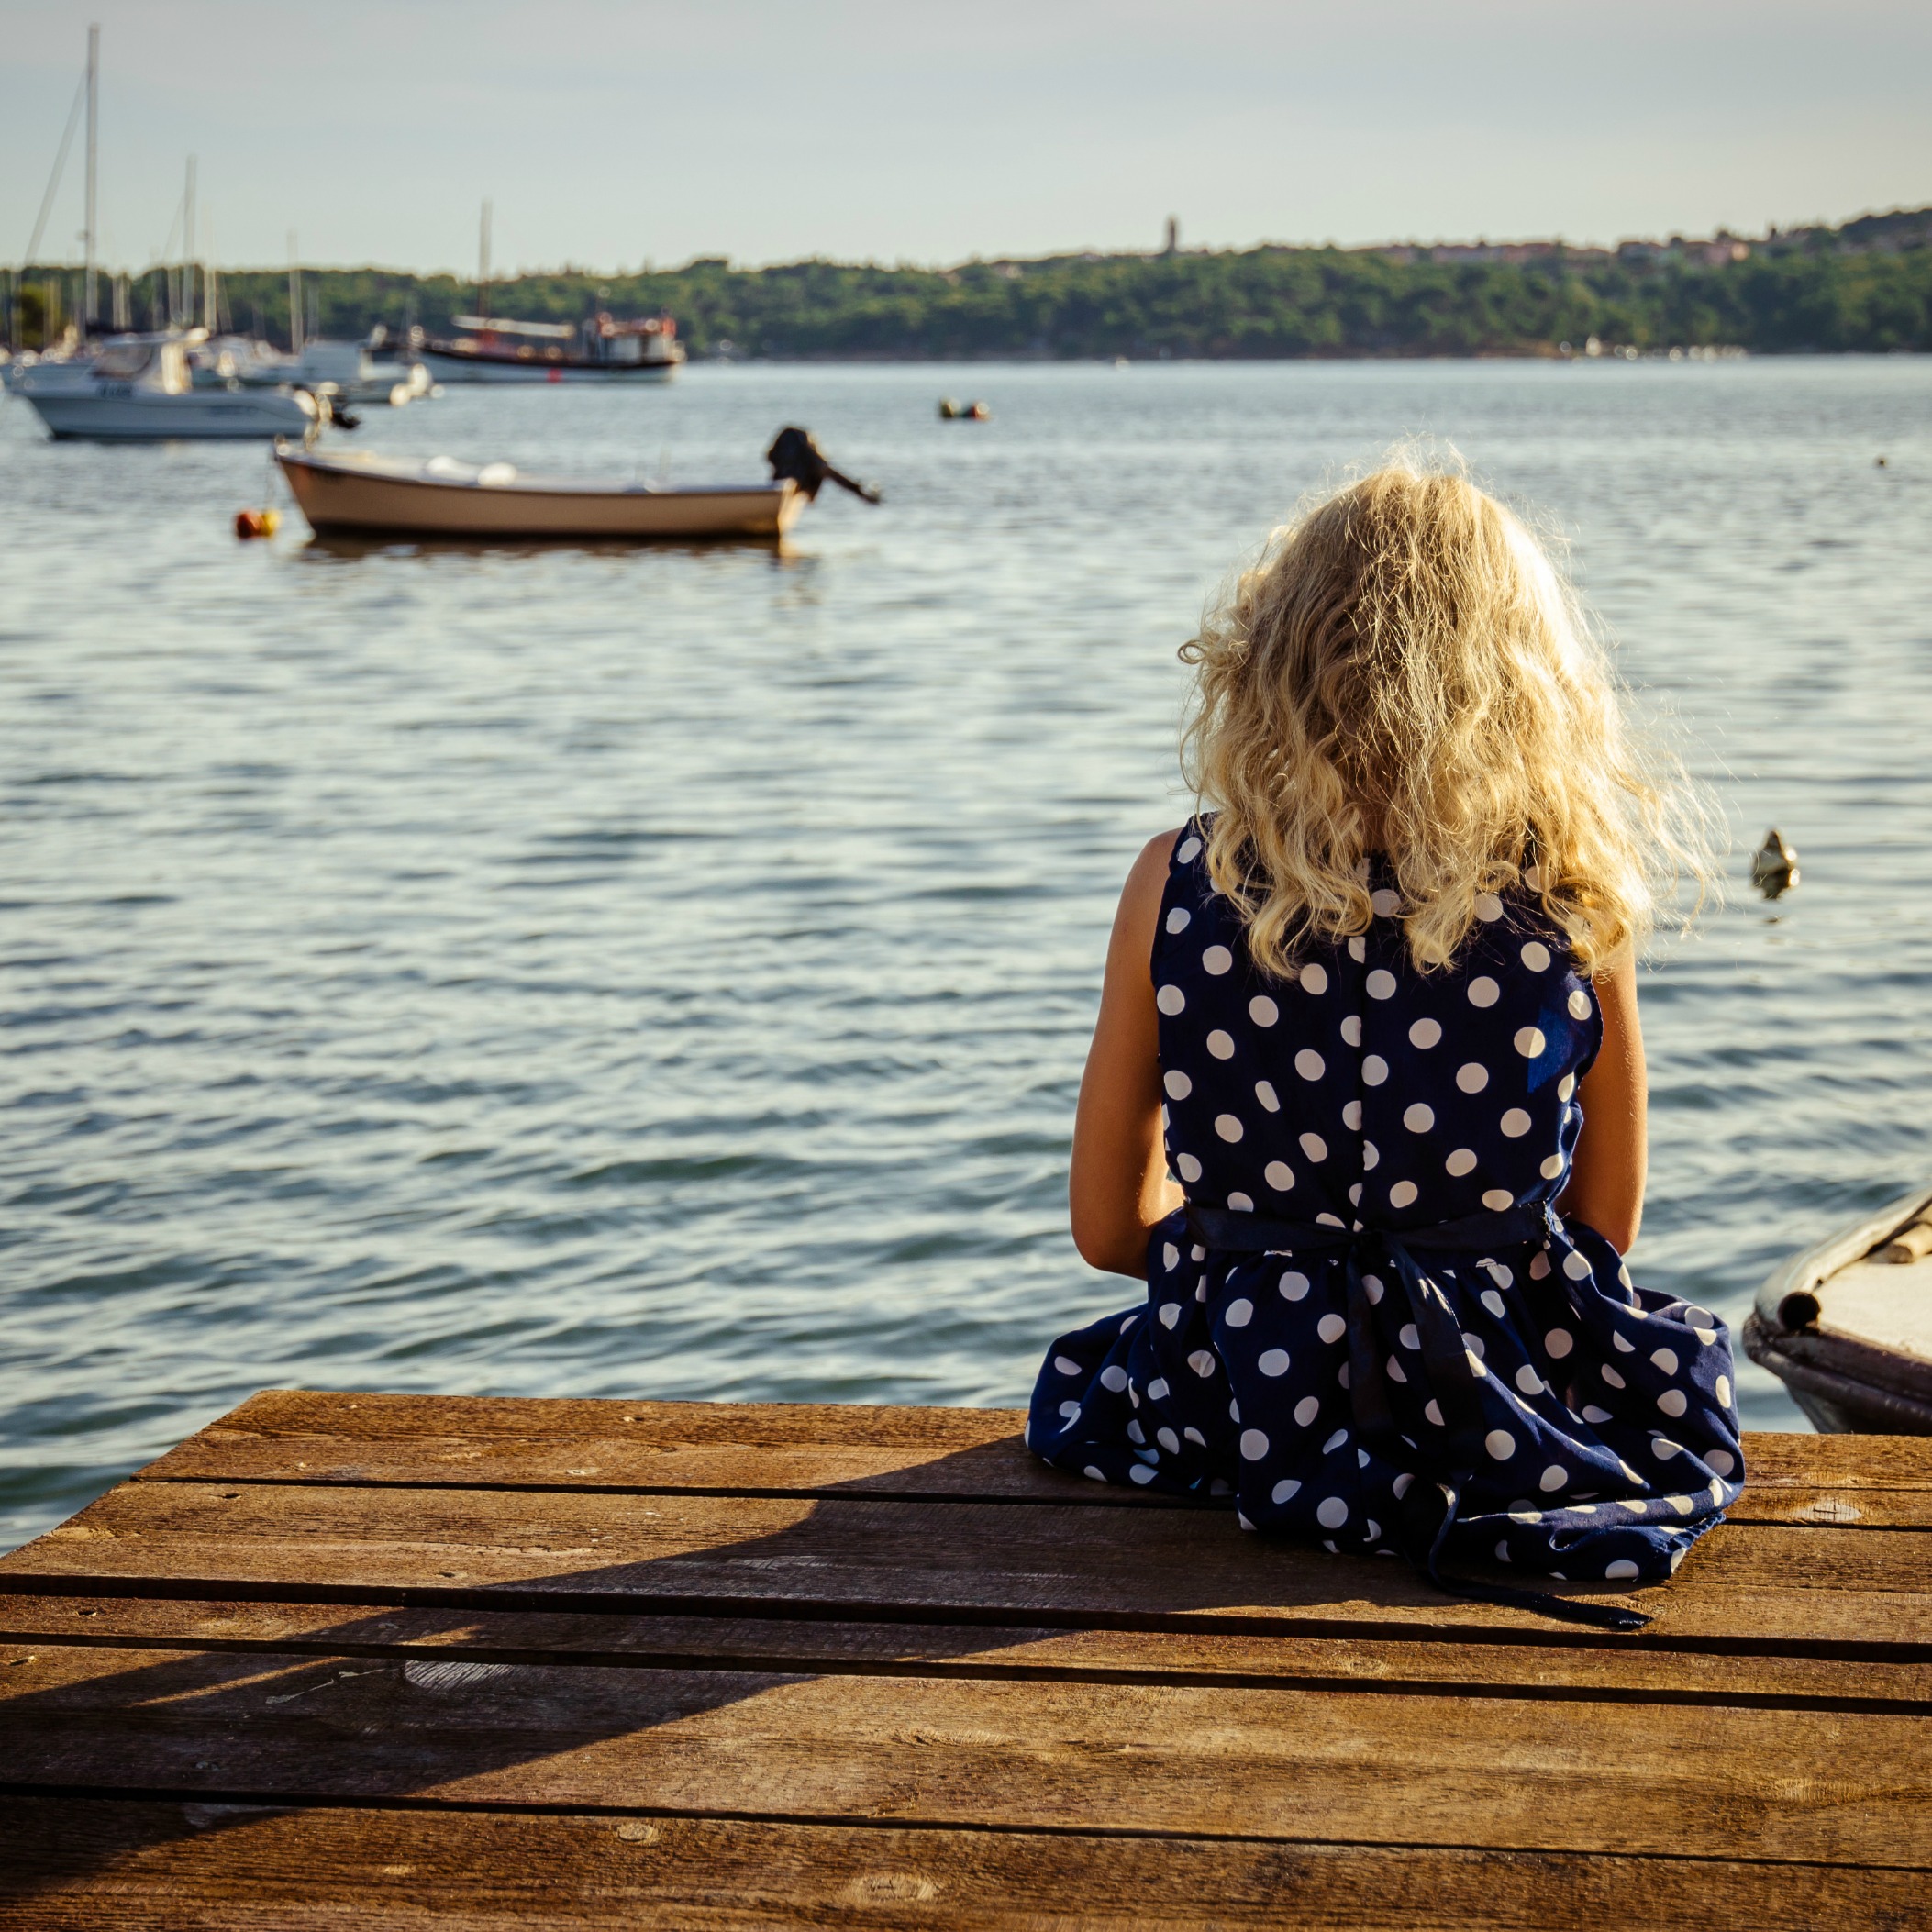 The Devastating Way We Are Unintentionally Limiting Our Daughters